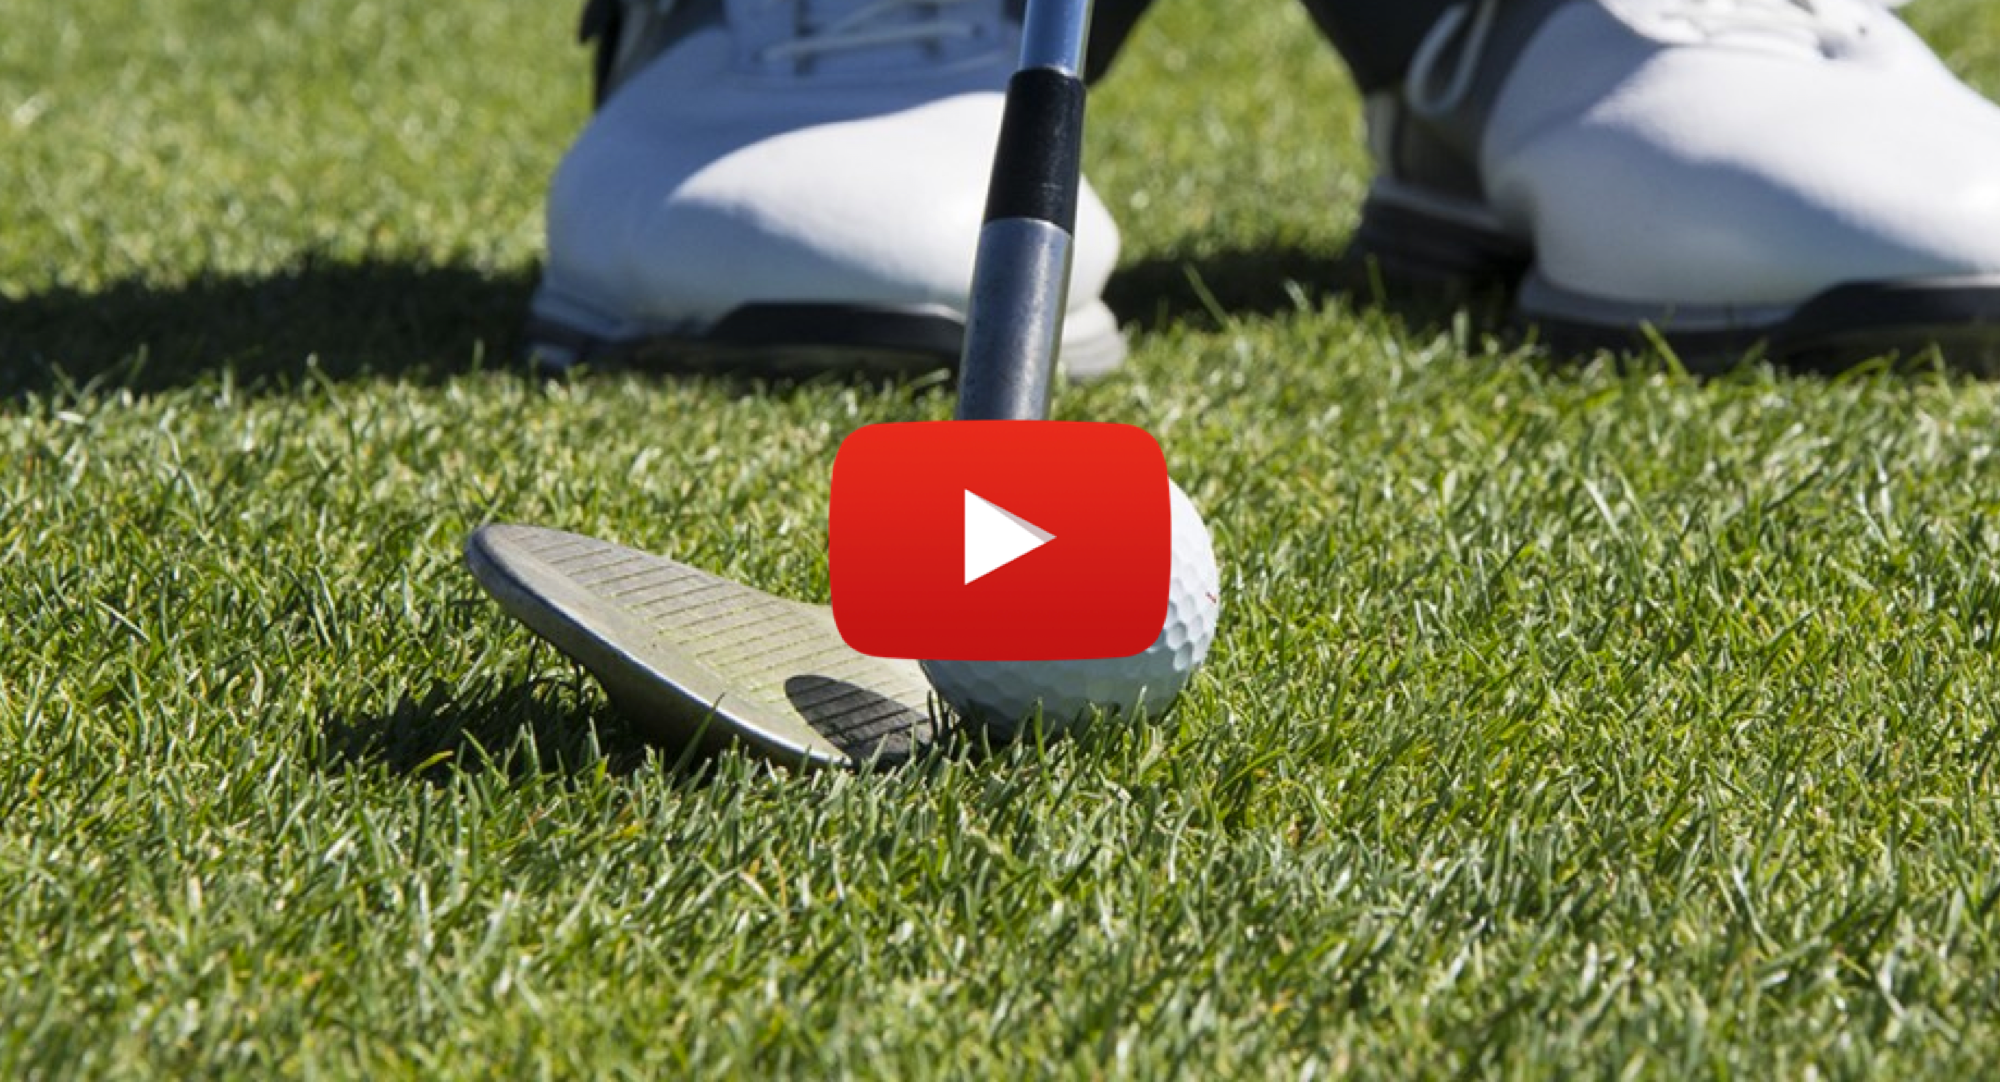 How to backspin your wedges and chip shots